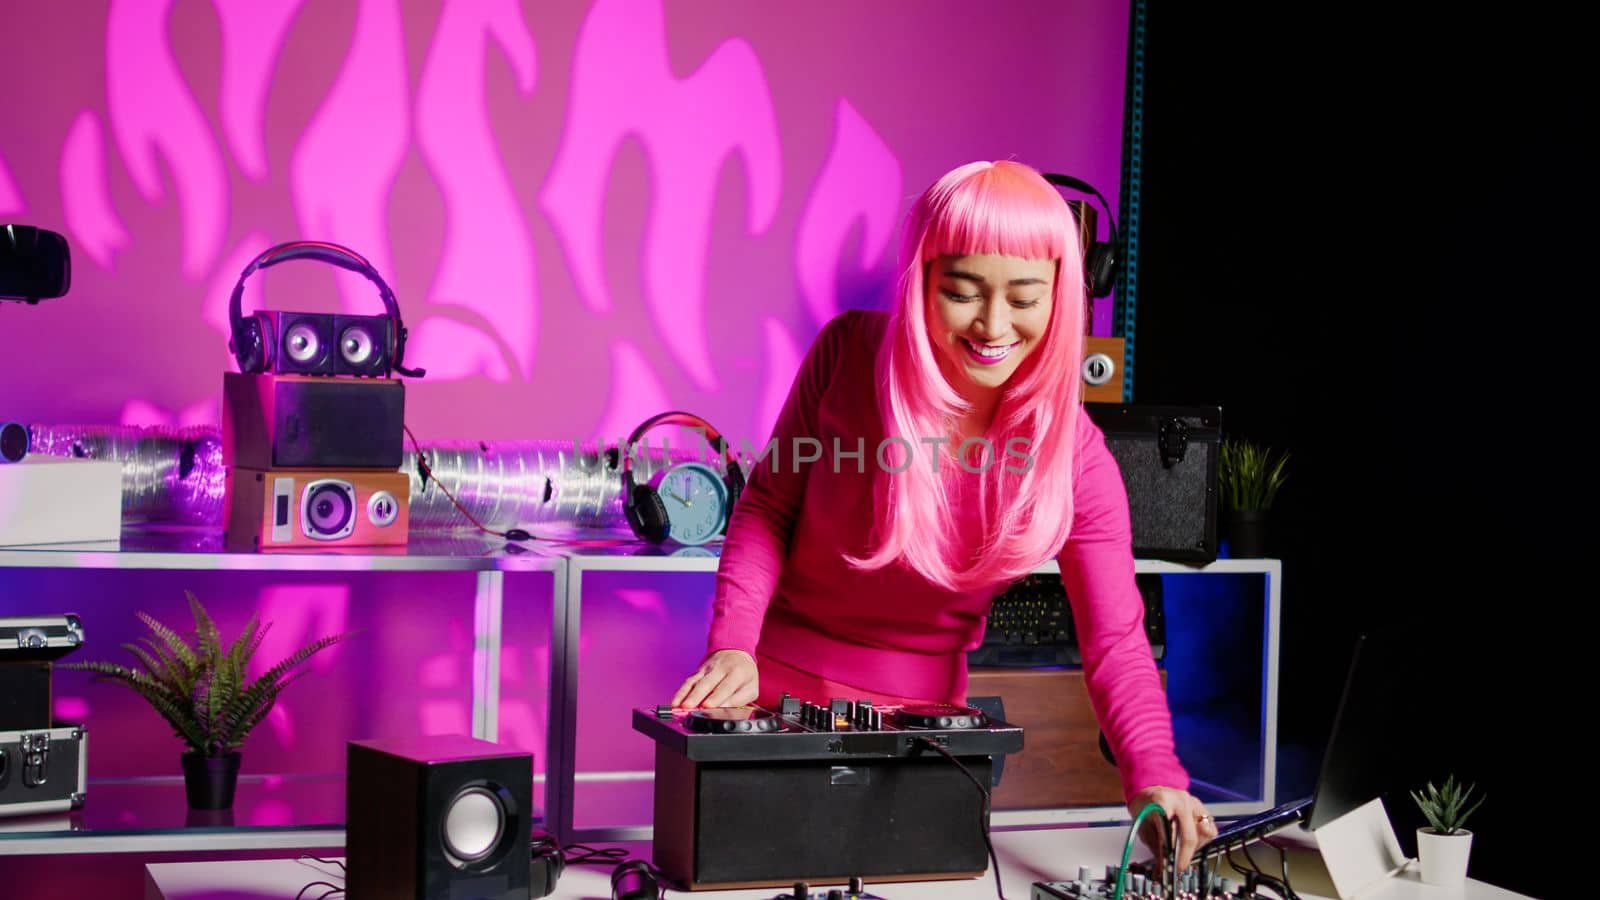 Smiling musician working as dj playing at mixer console by DCStudio